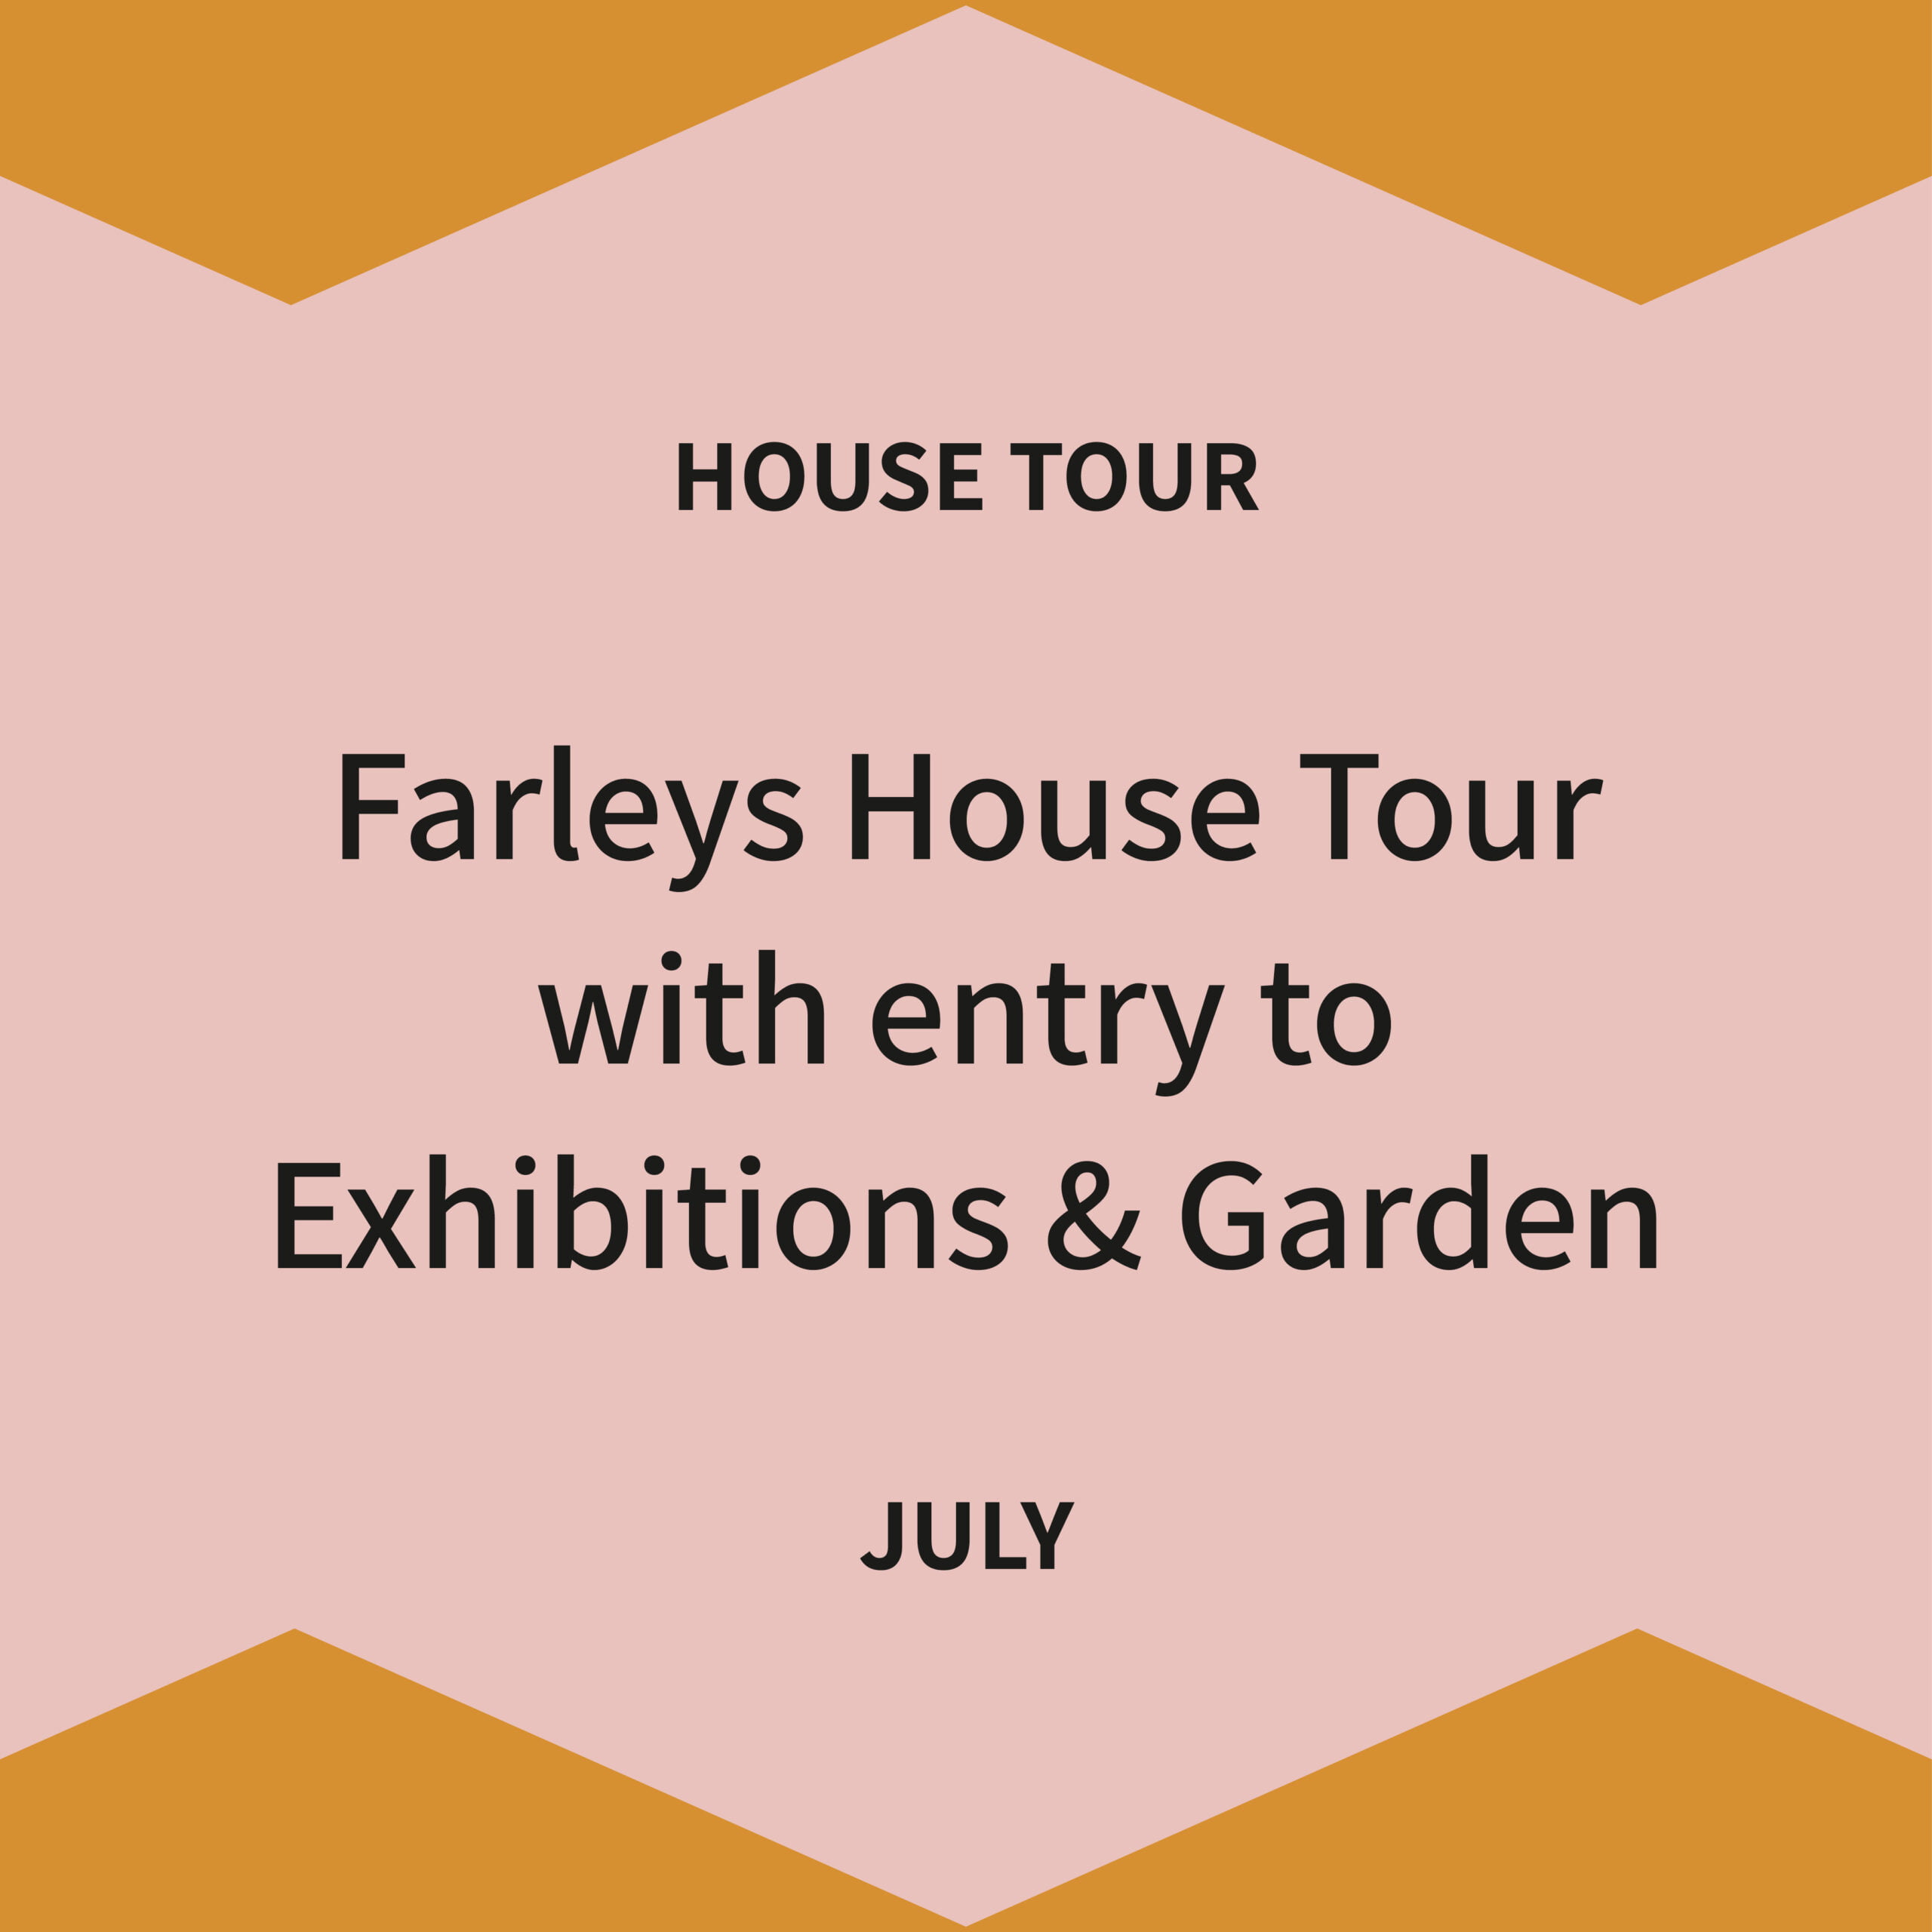 House tour tickets July